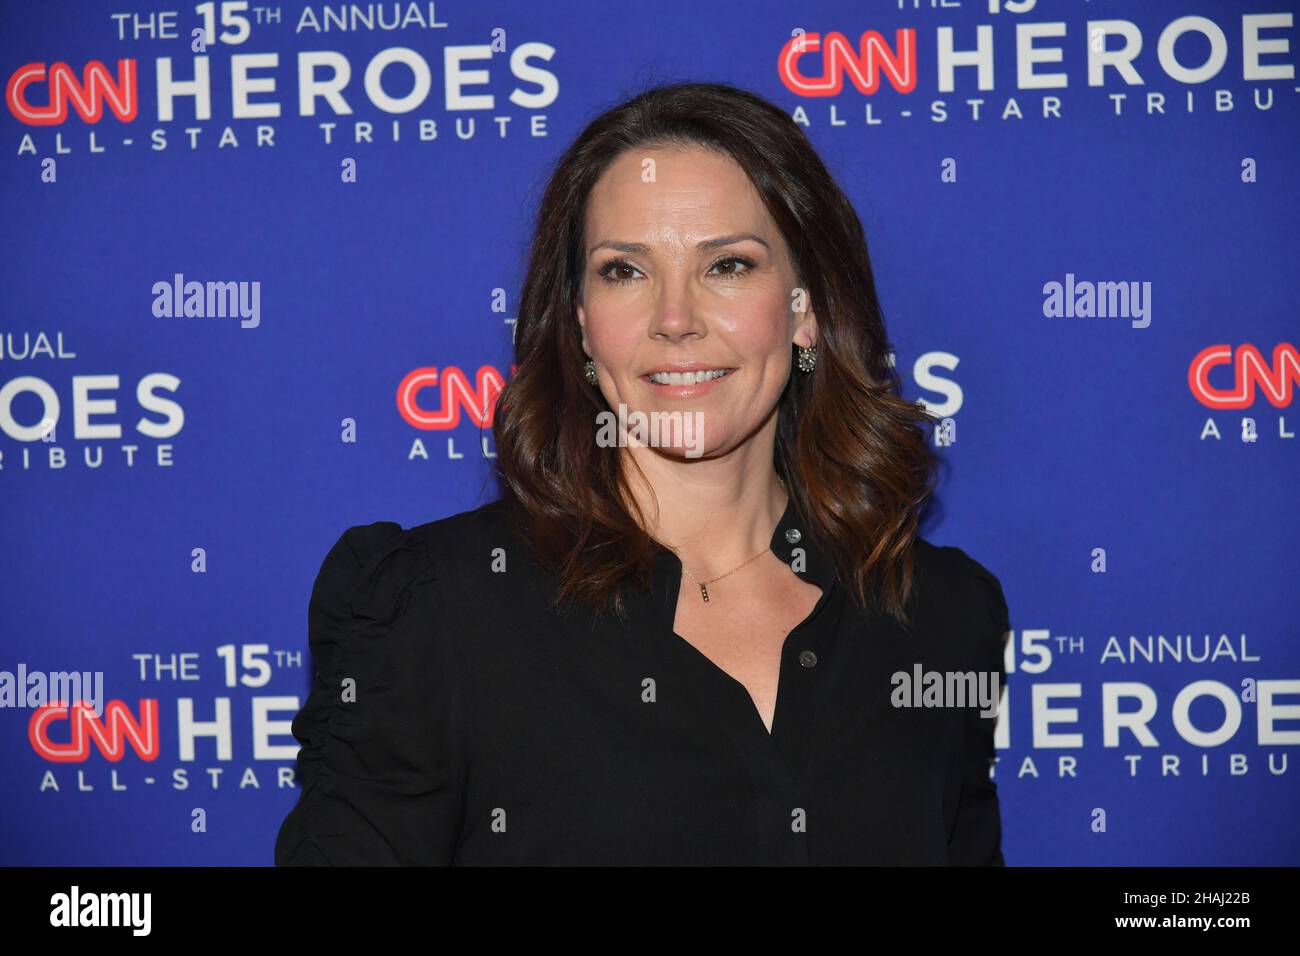 Erica Hill attends The 15th Annual CNN Heroes: All-Star Tribute at American Museum of Natural History on December 12, 2021 in New York. Stock Photo